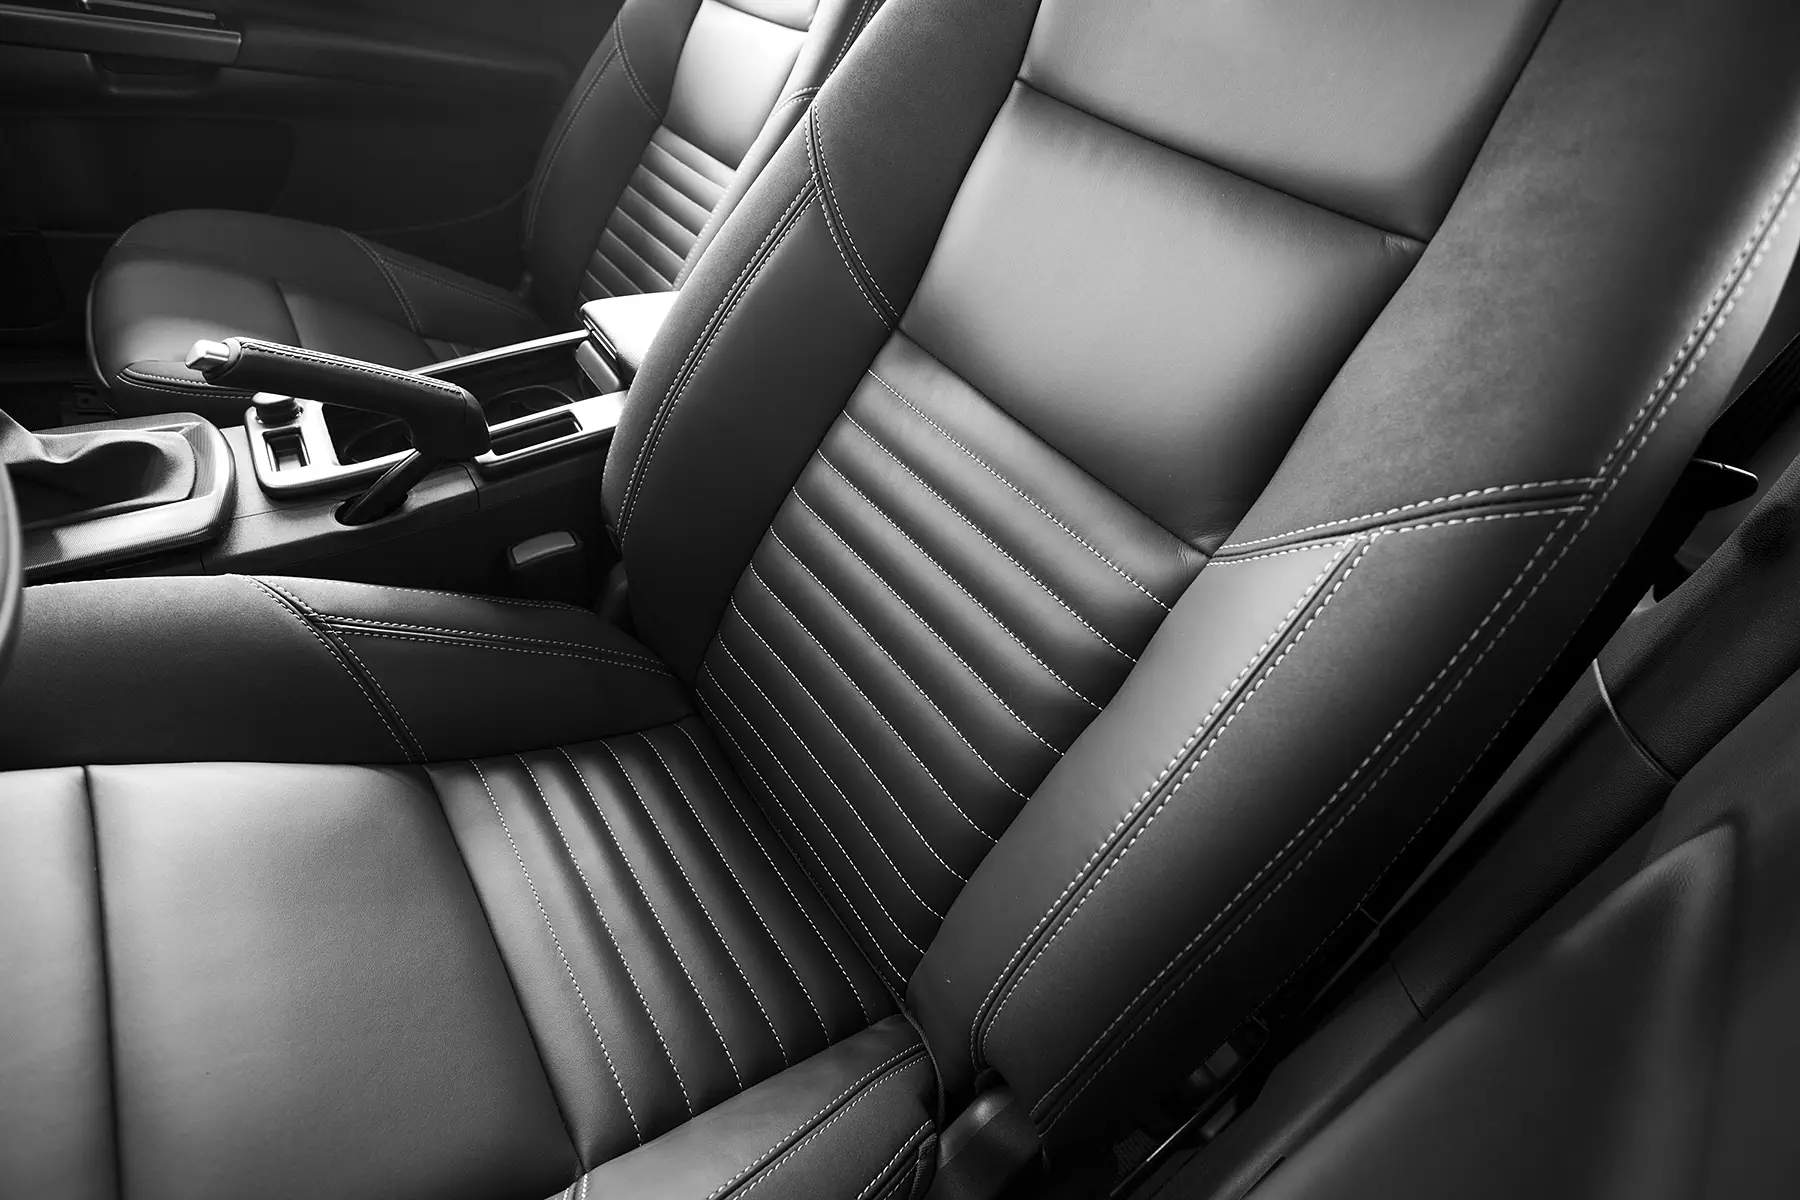 The Perfect DIY To Clean Car Upholstery  Cleaning car upholstery, Car  cleaning, Diy car cleaning